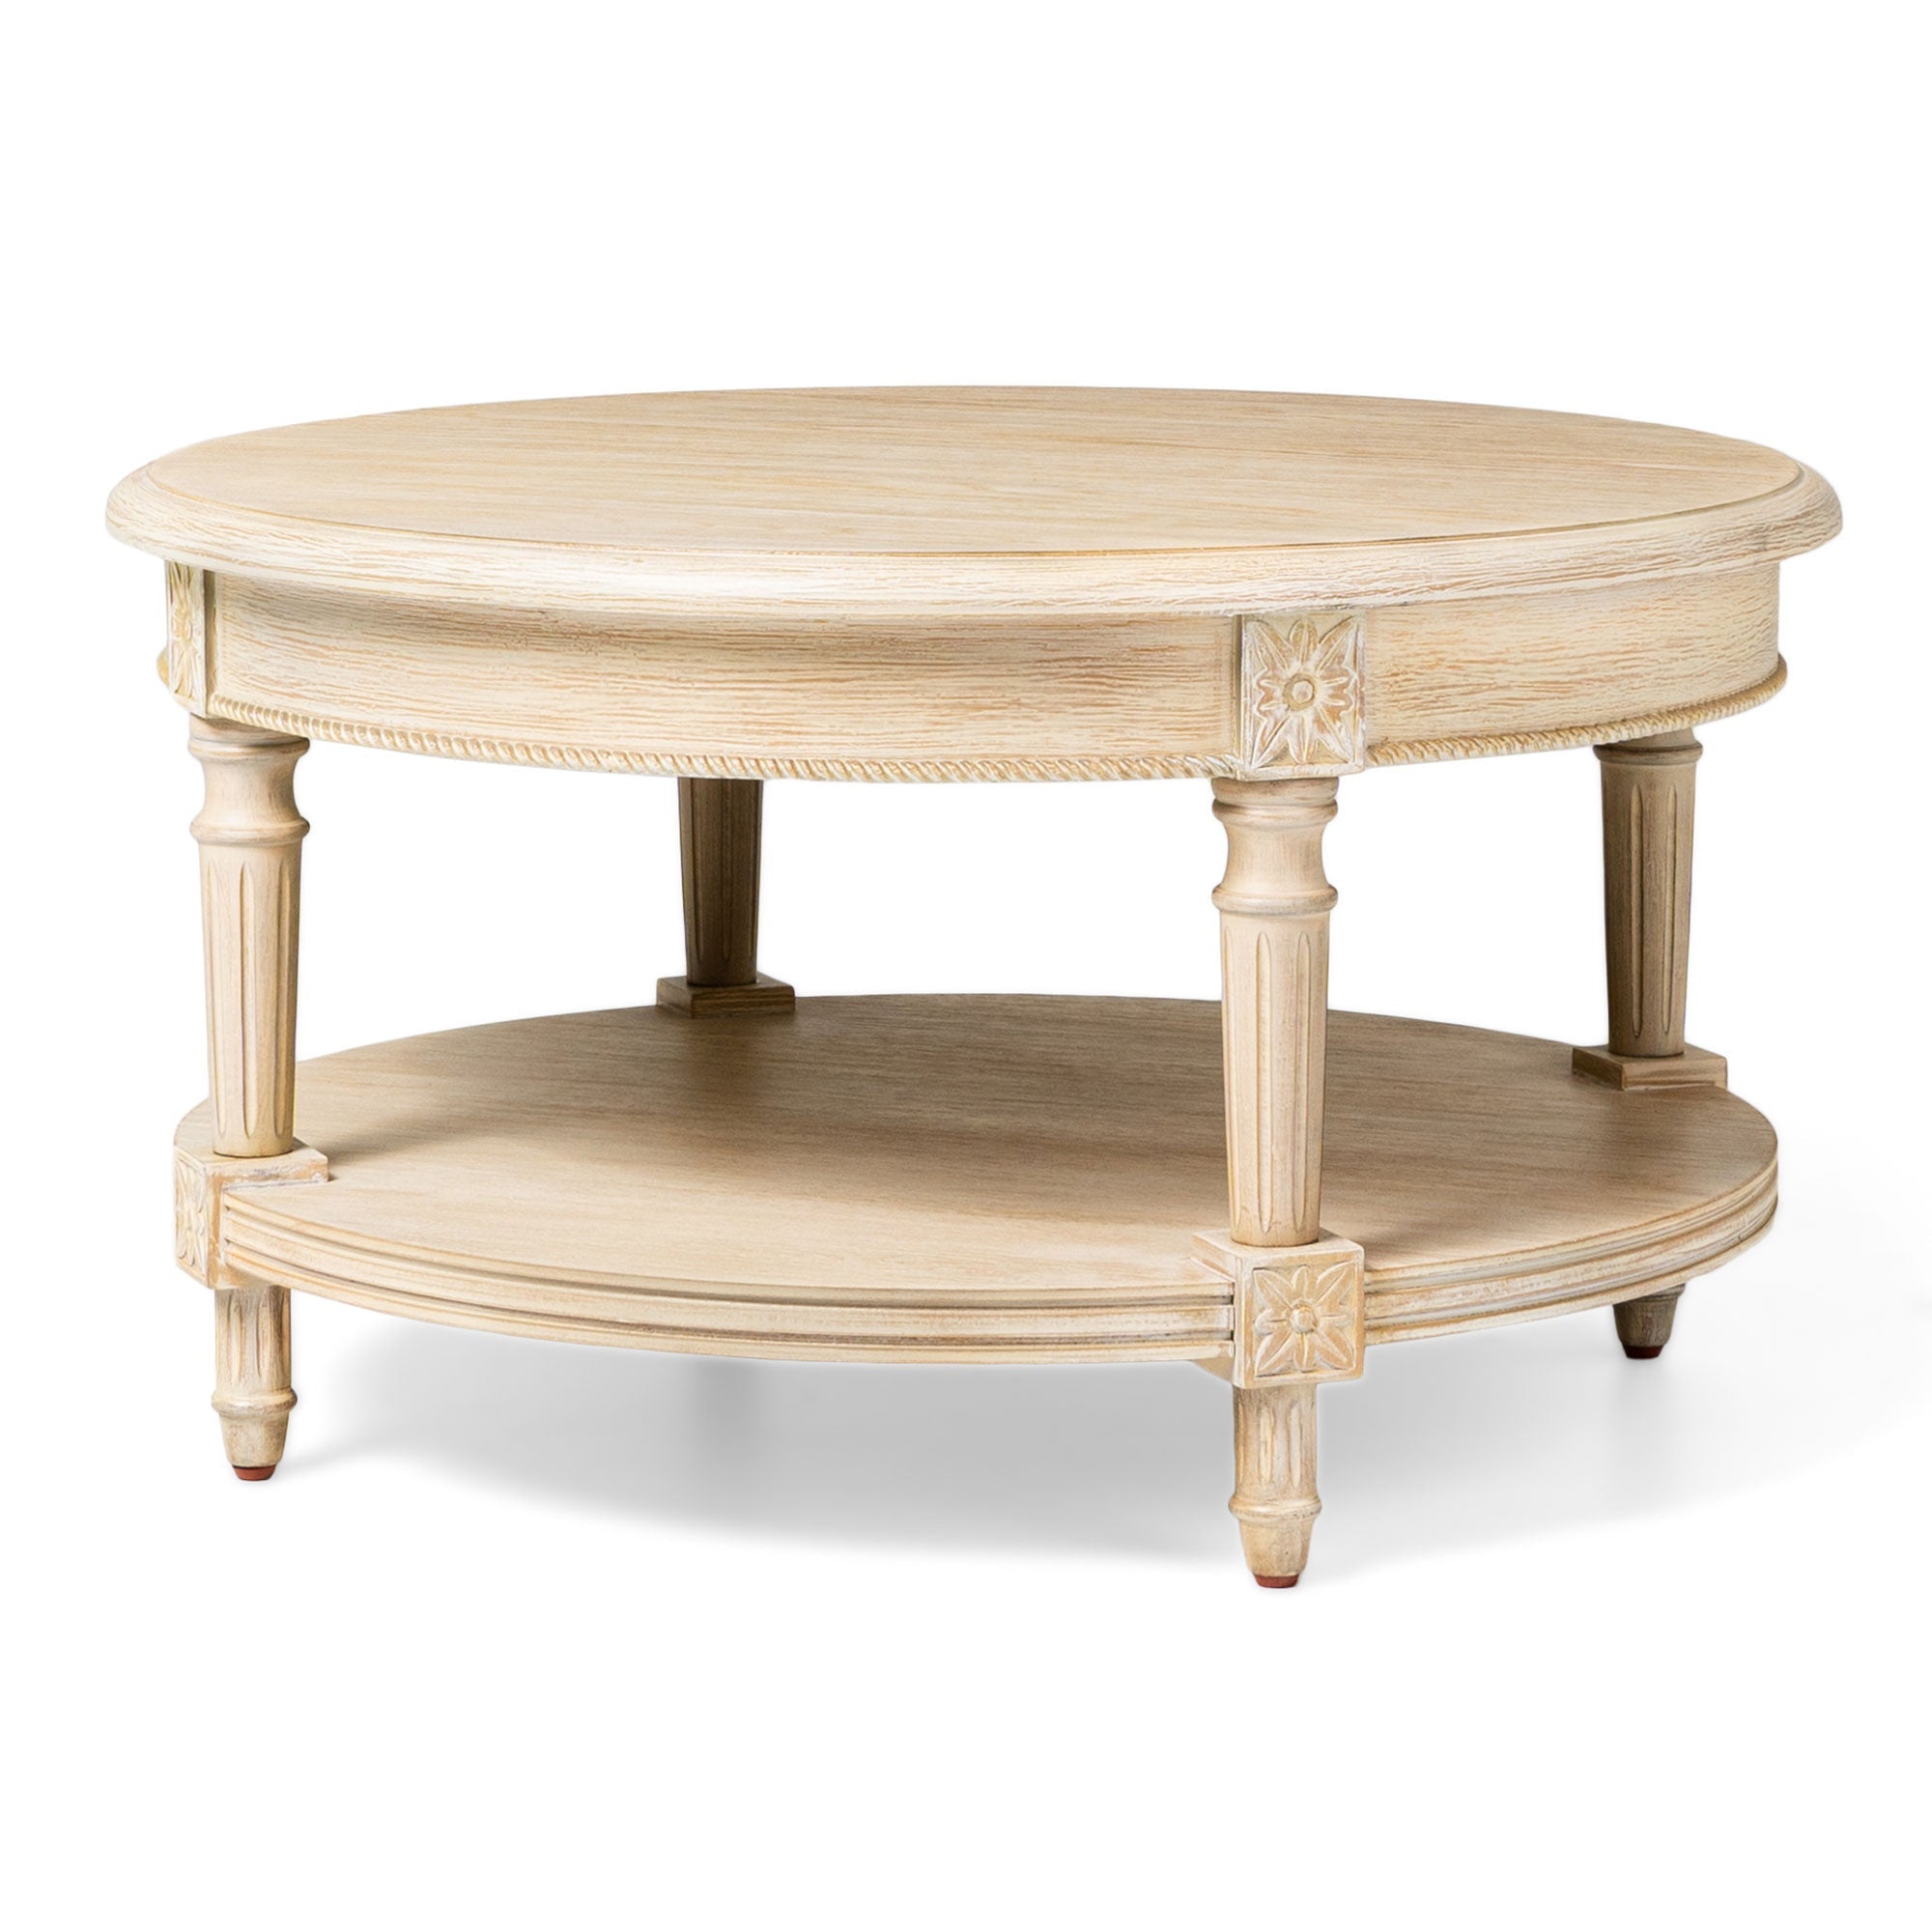 Pullman Traditional Round Wooden Coffee Table in Antiqued White Finish in Accent Tables by Maven Lane